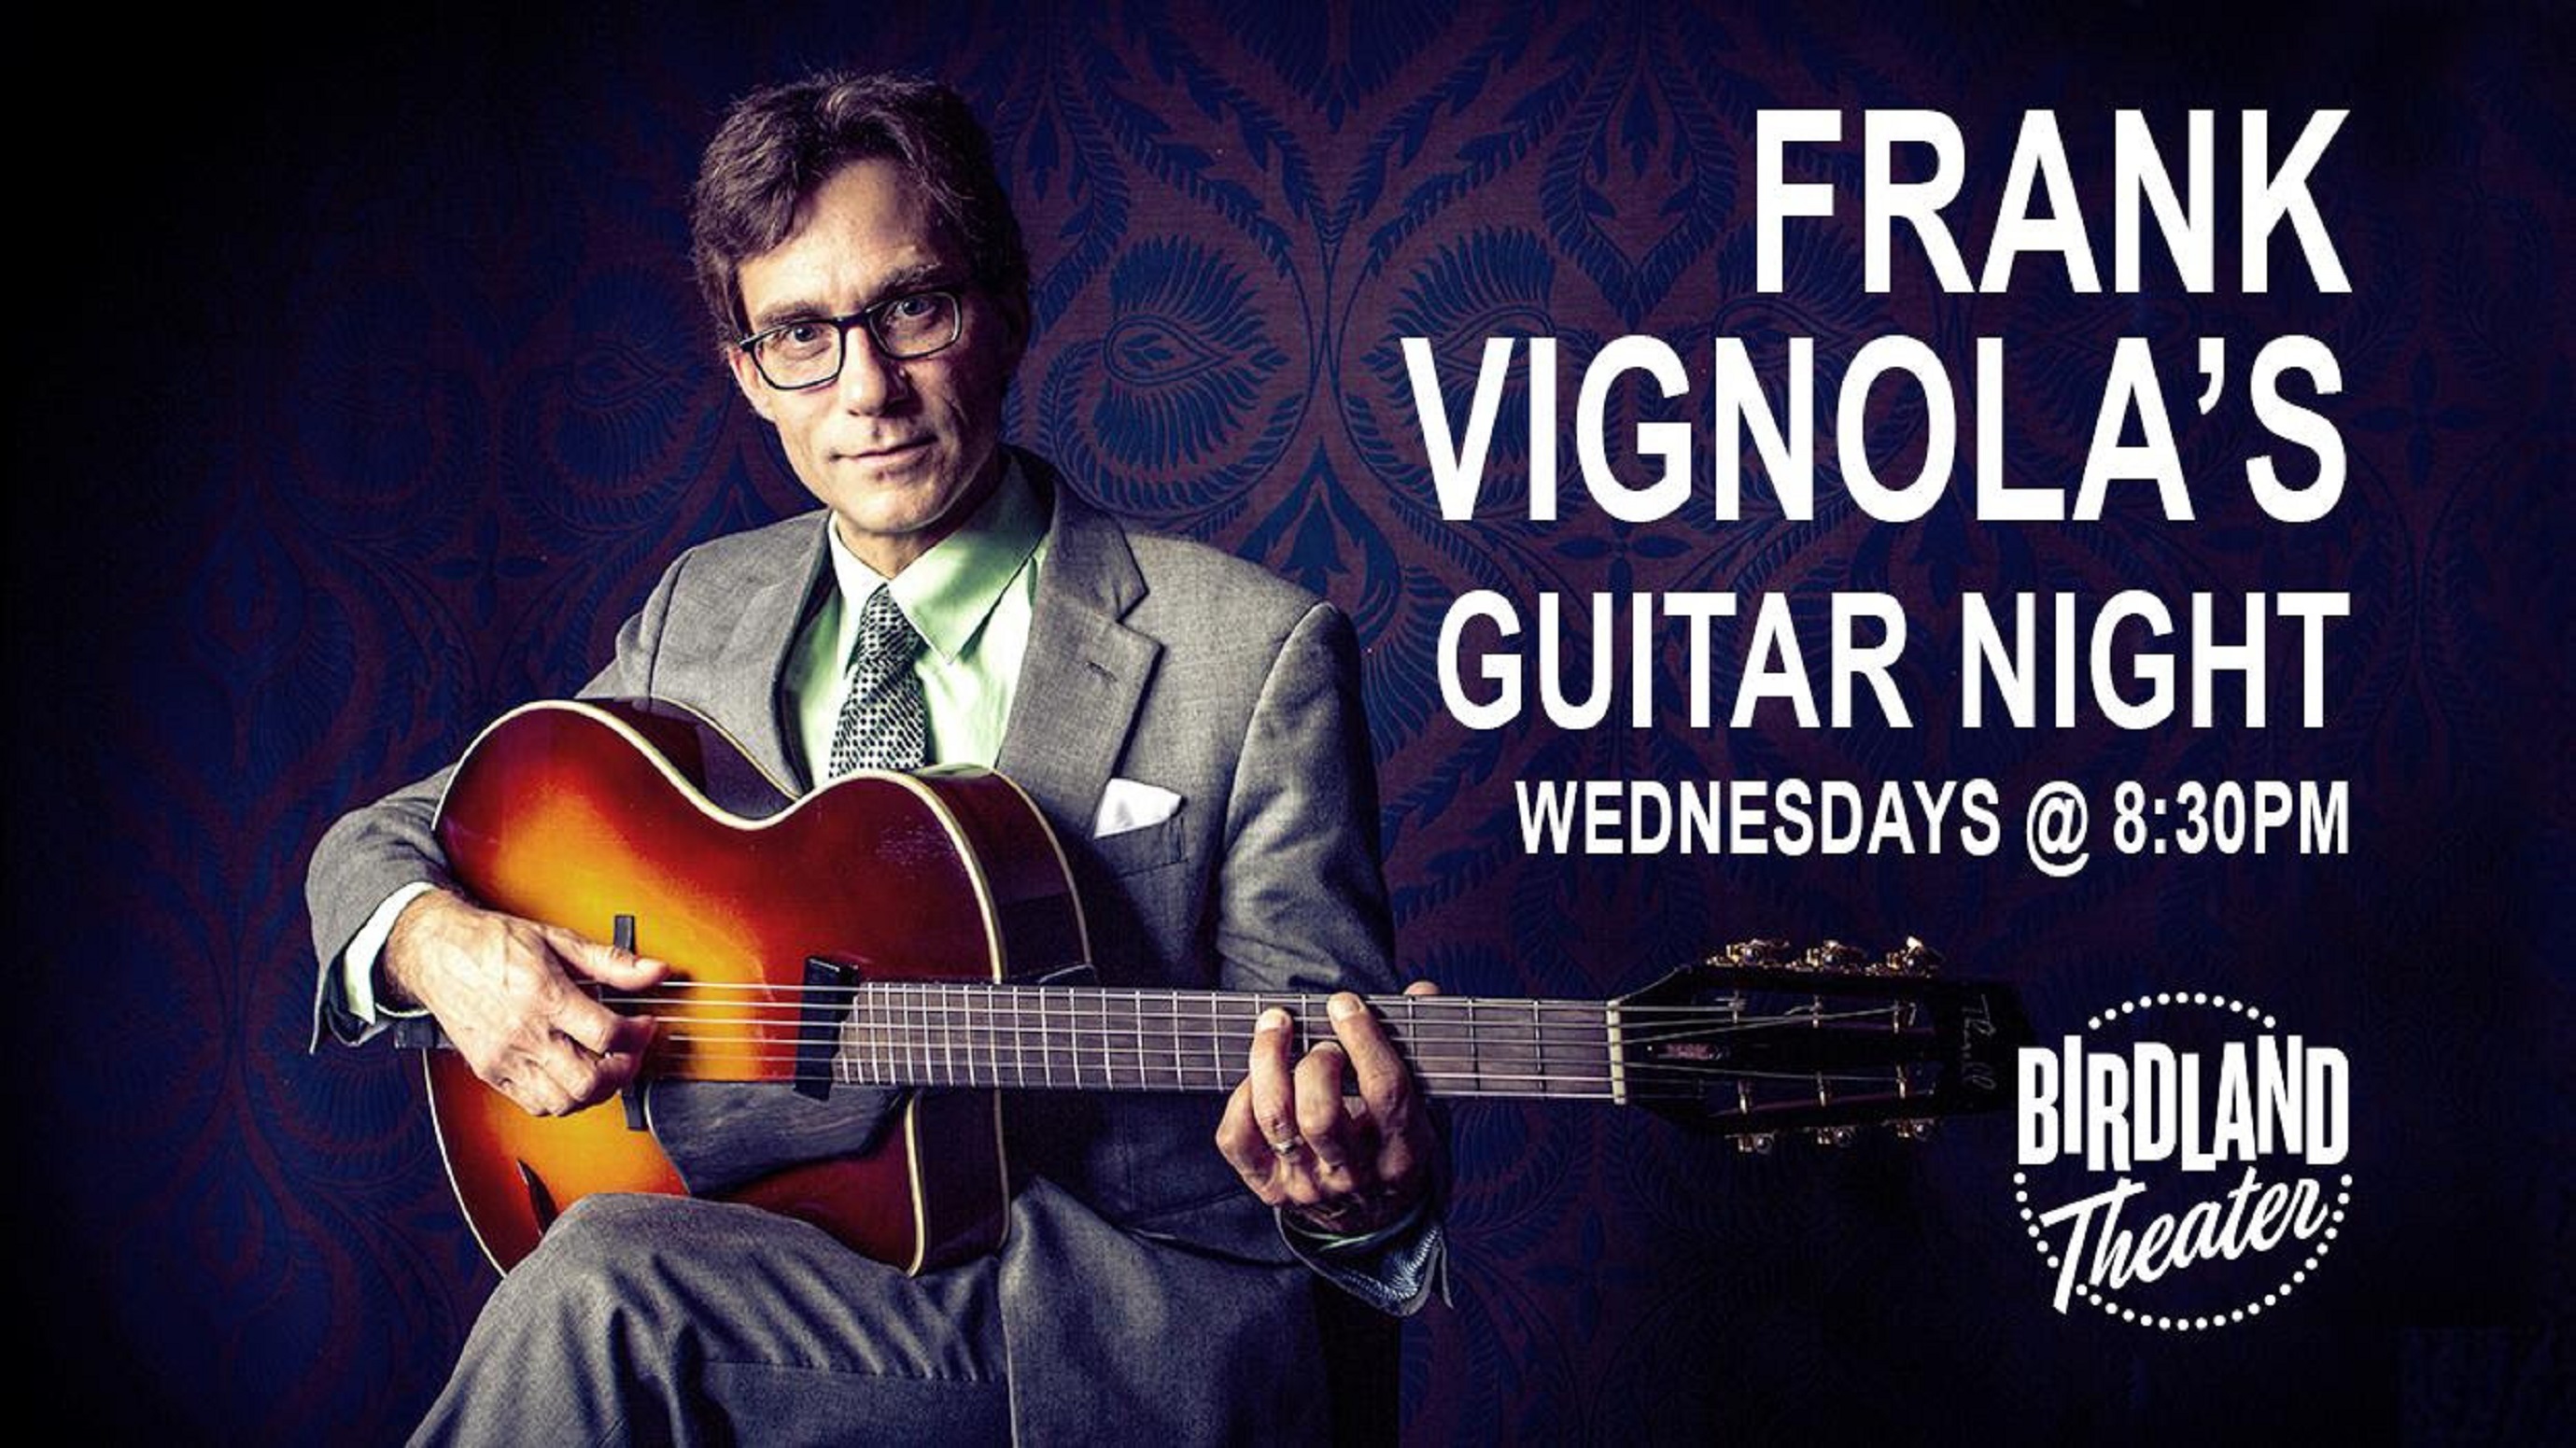 Frank Vignola’s Guitar Night Upcoming Schedule at the Birdland Theatre Wednesday's at 8:30pm